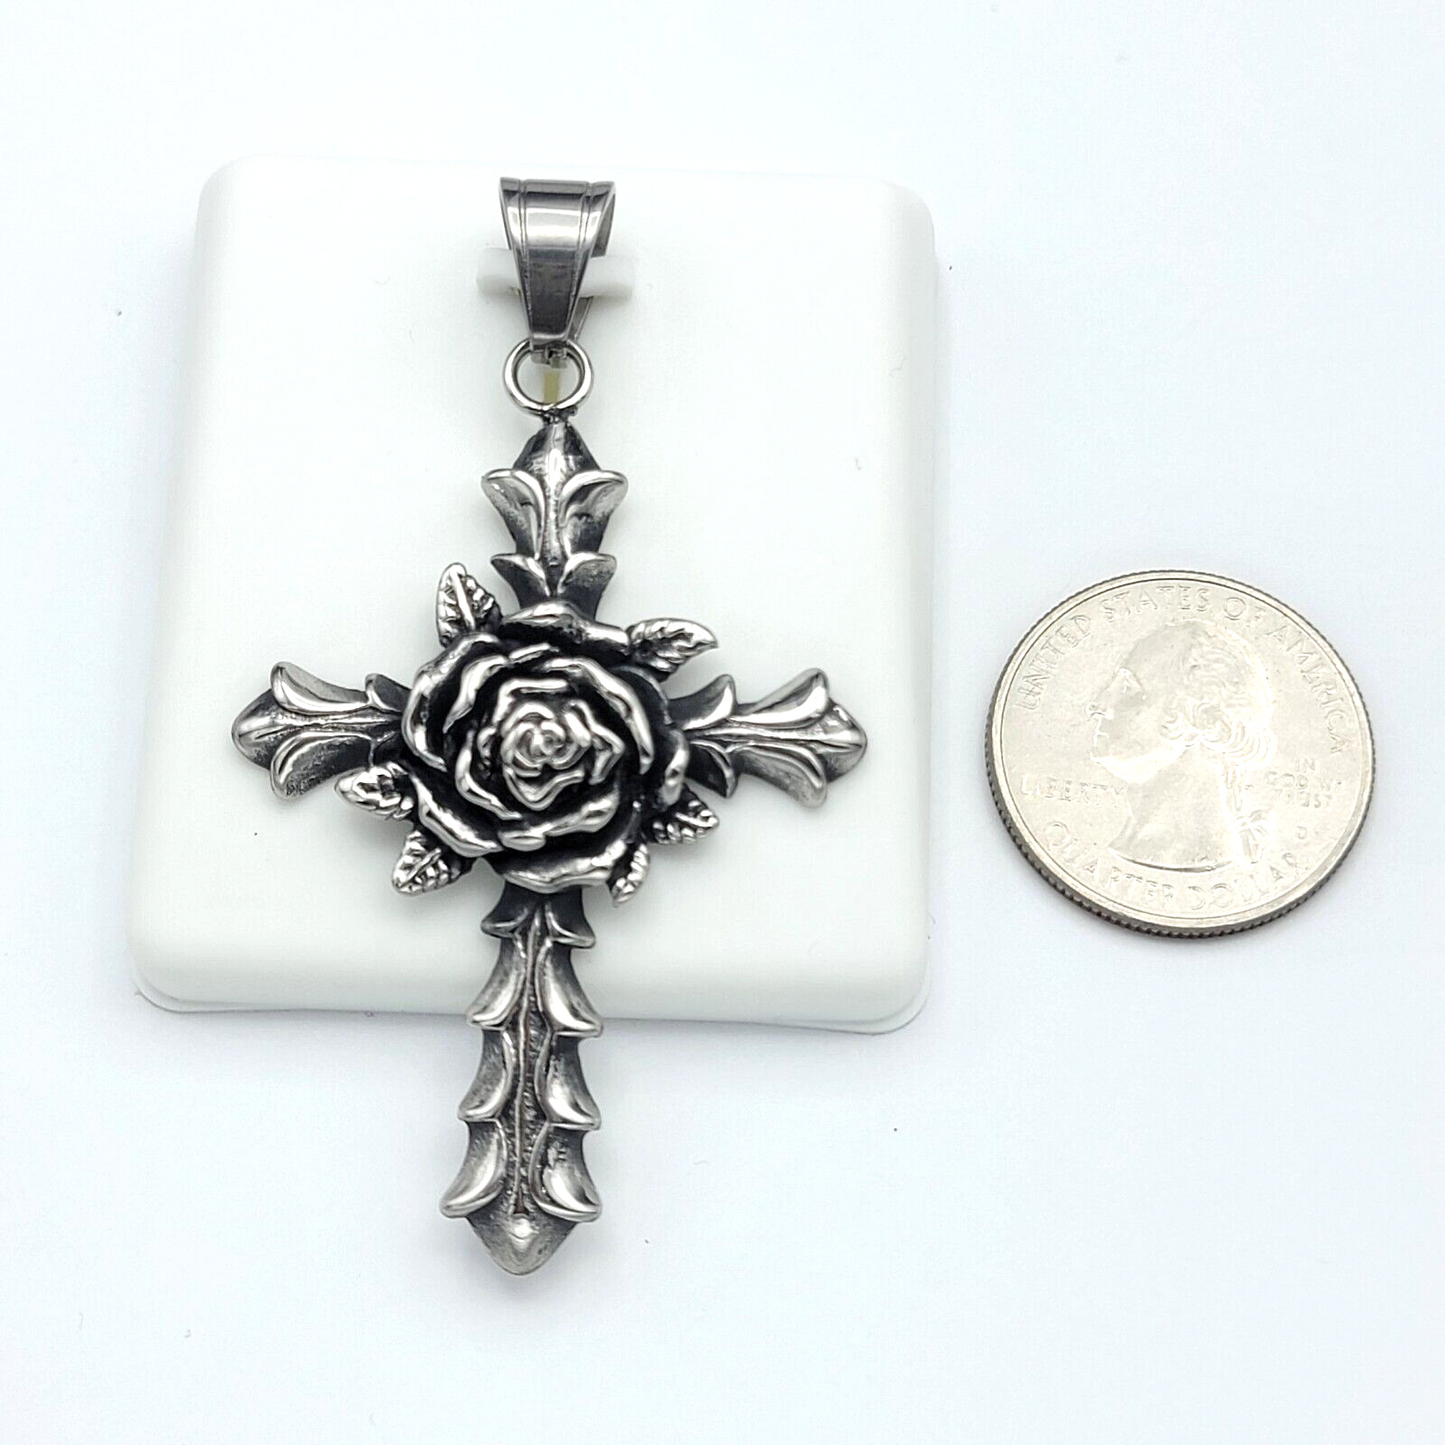 Necklaces - Stainless Steel. Vintage Silver Rose Cross Pendant & Chain.